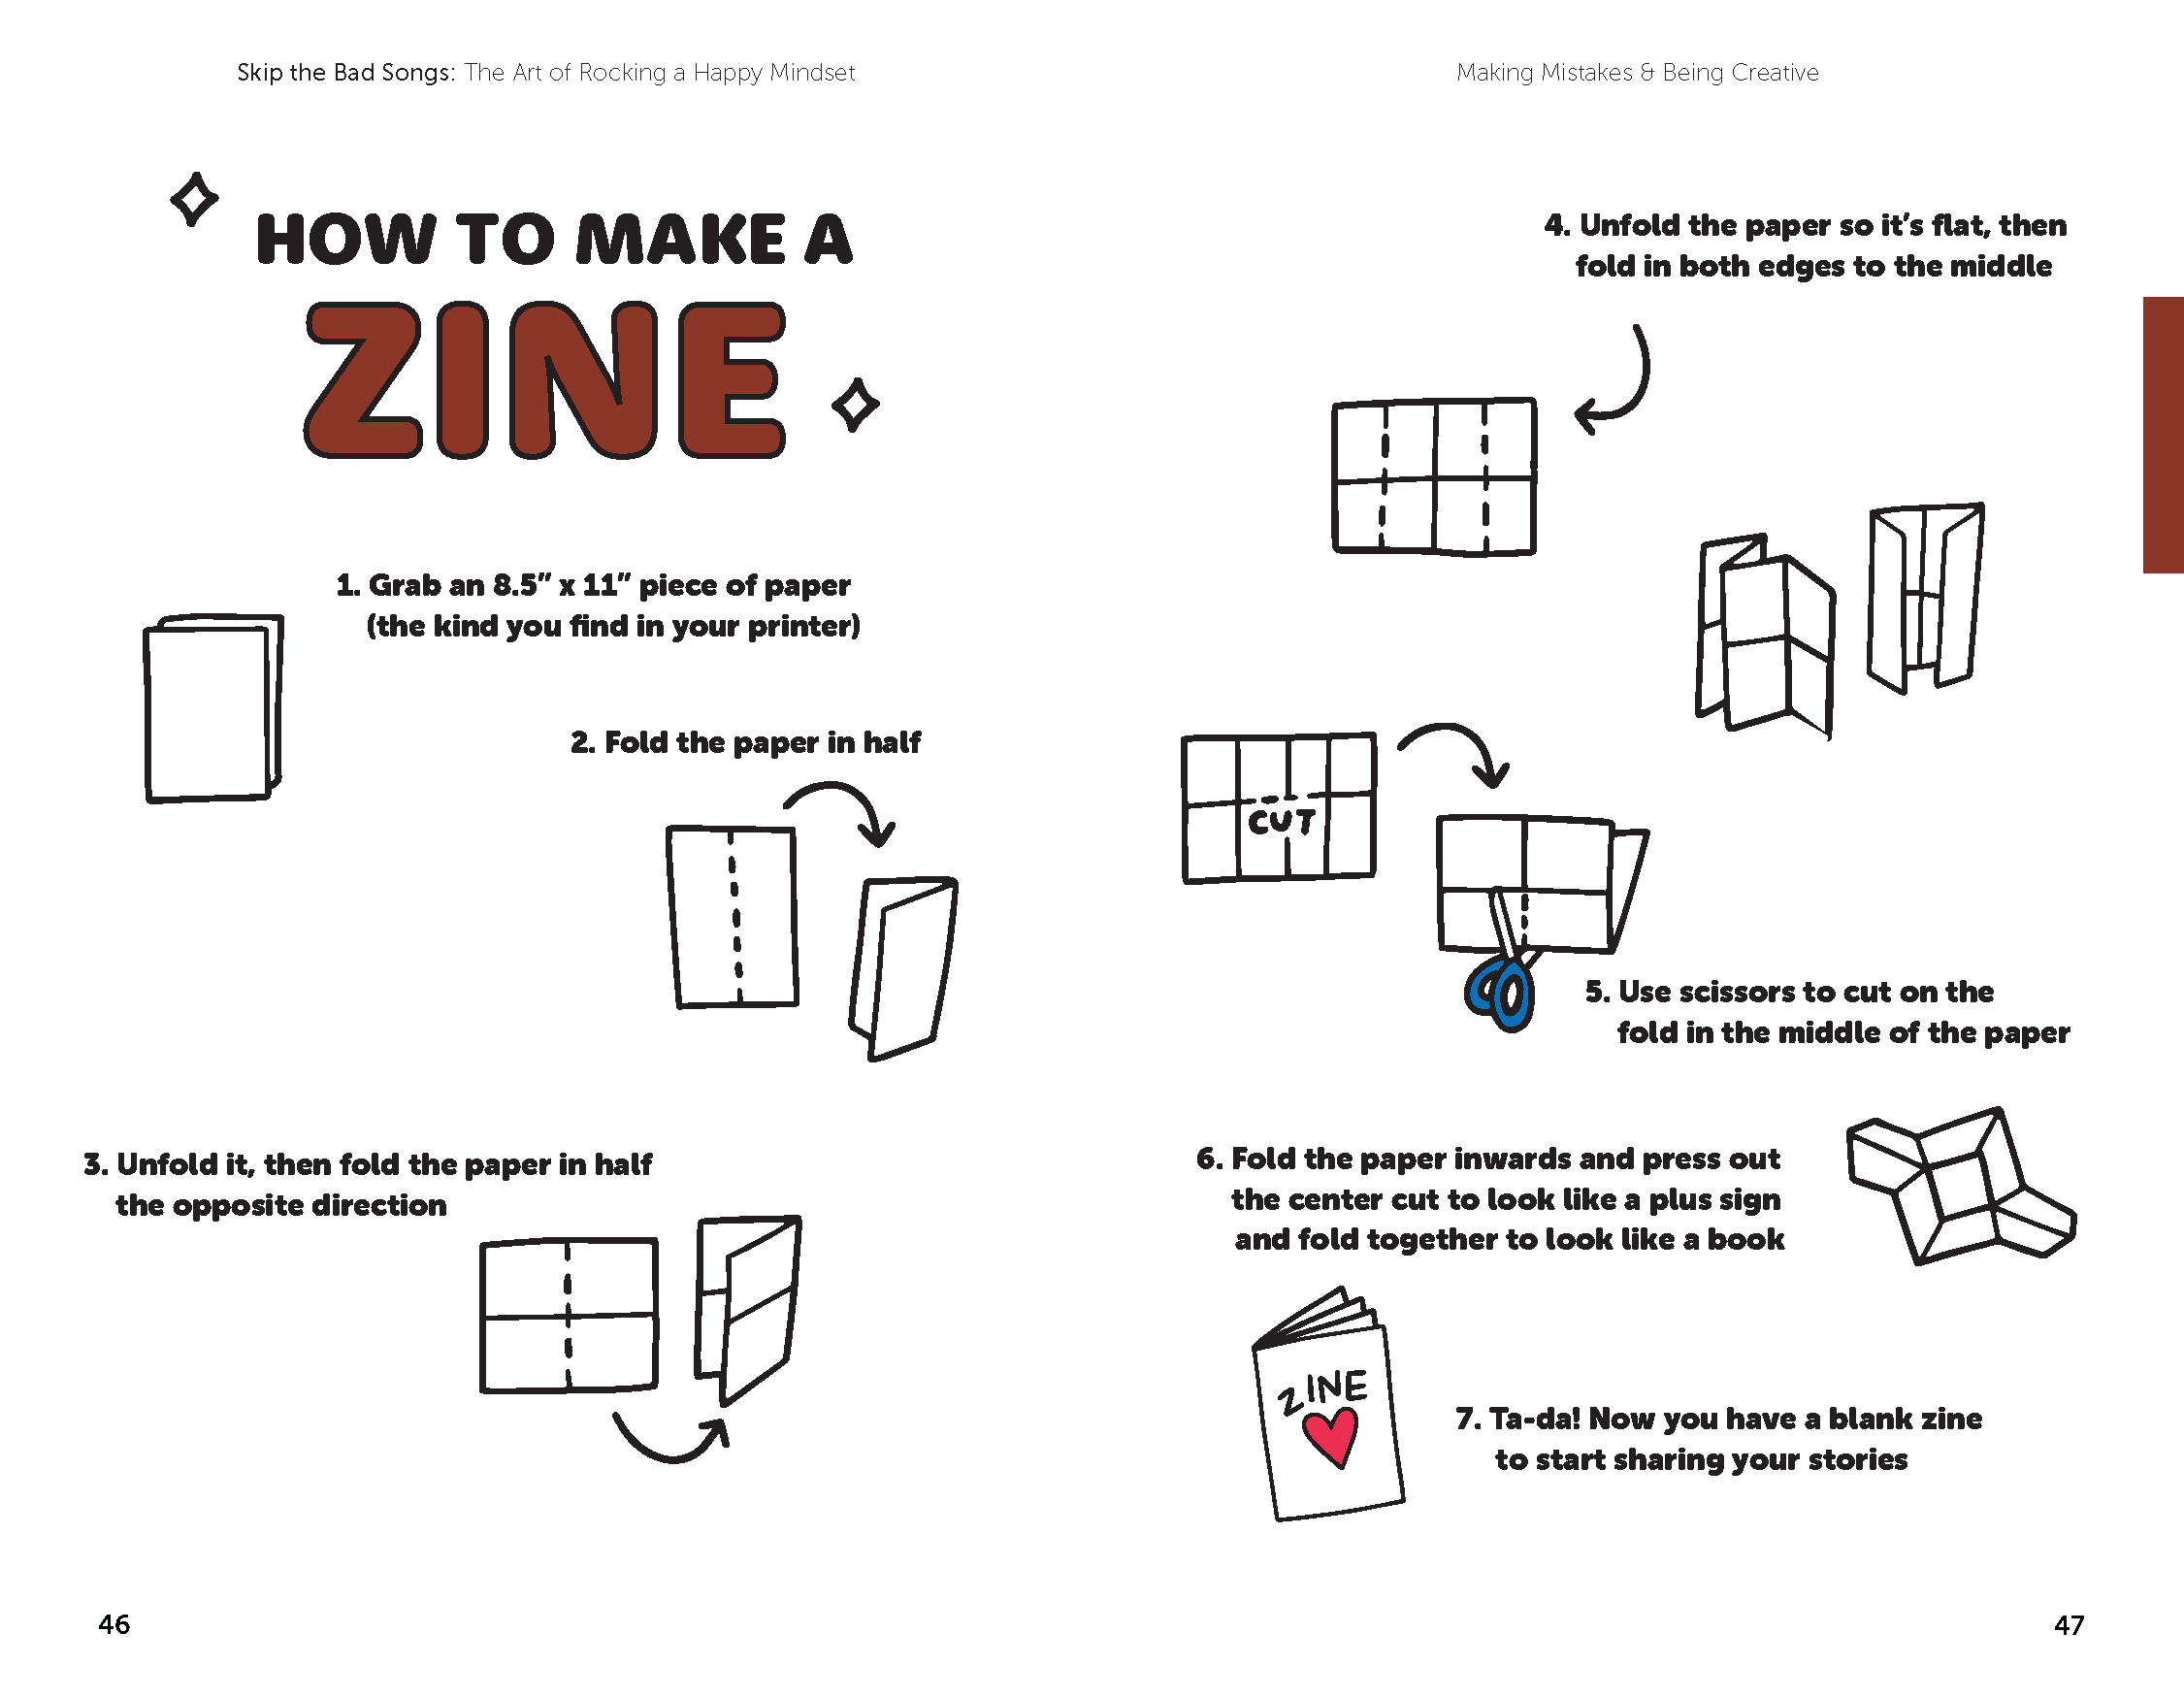 How to make a zine page in the book, Skip the Bad Songs, a self help book for tweens